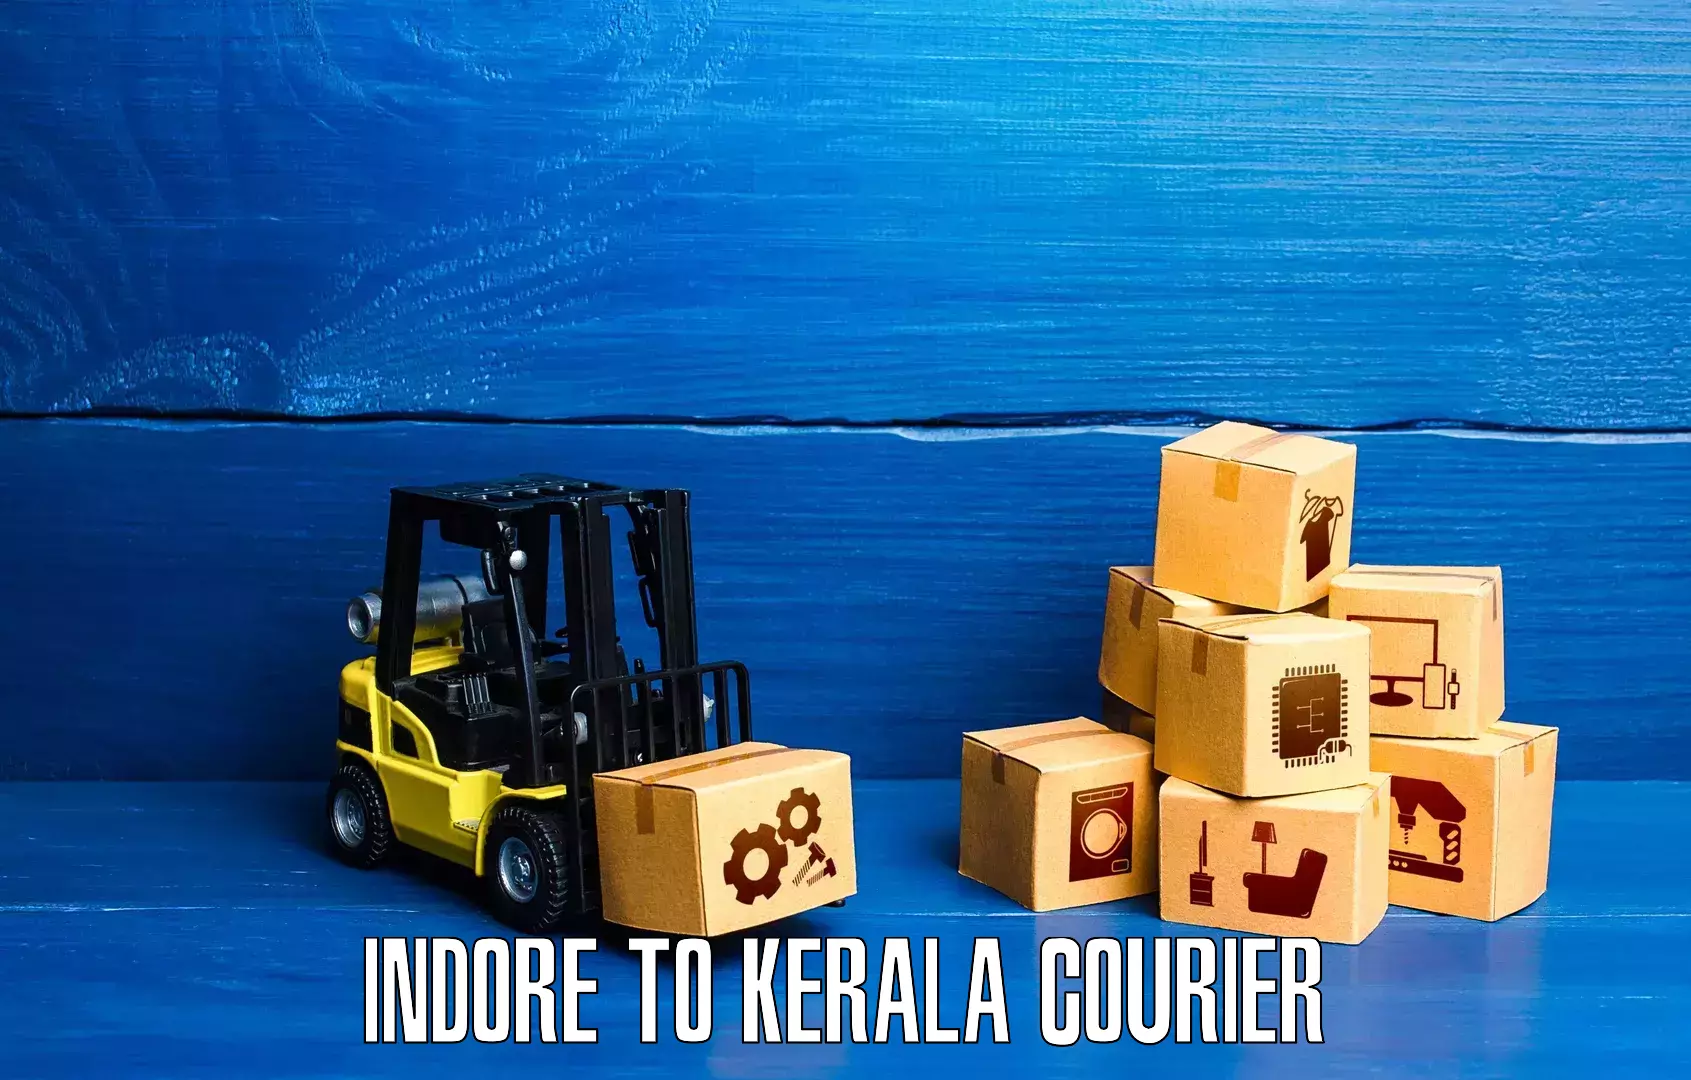 Flexible delivery schedules Indore to Cochin Port Kochi